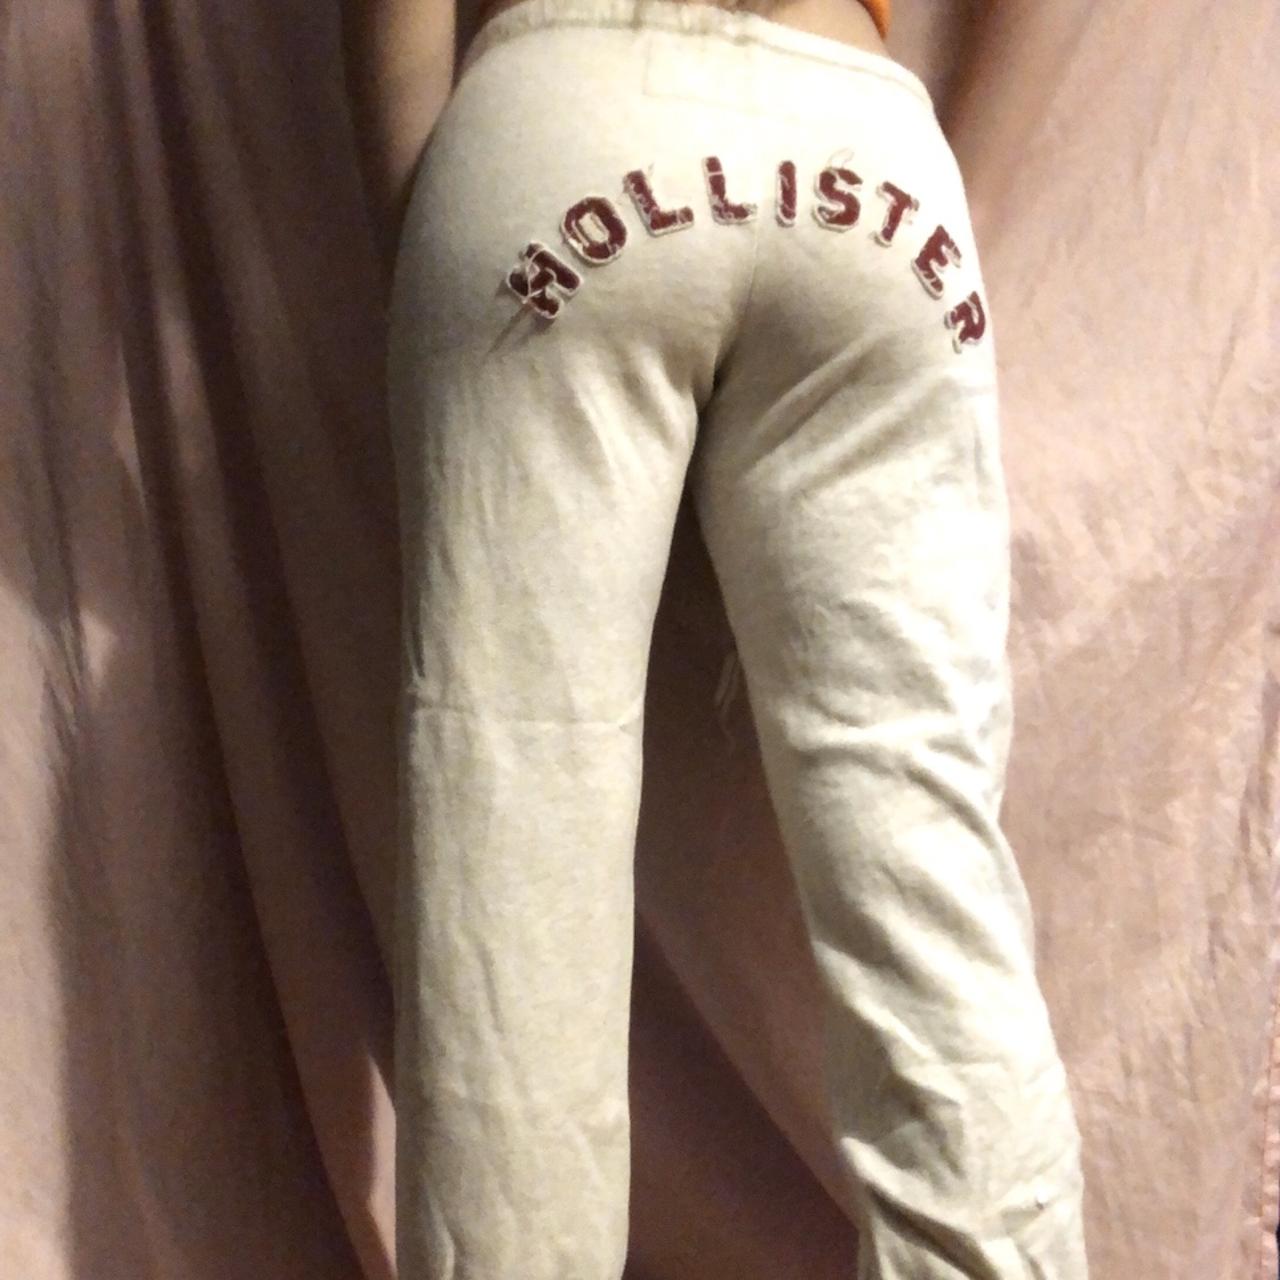 Hollister sweatpants cropped size XS could fit a